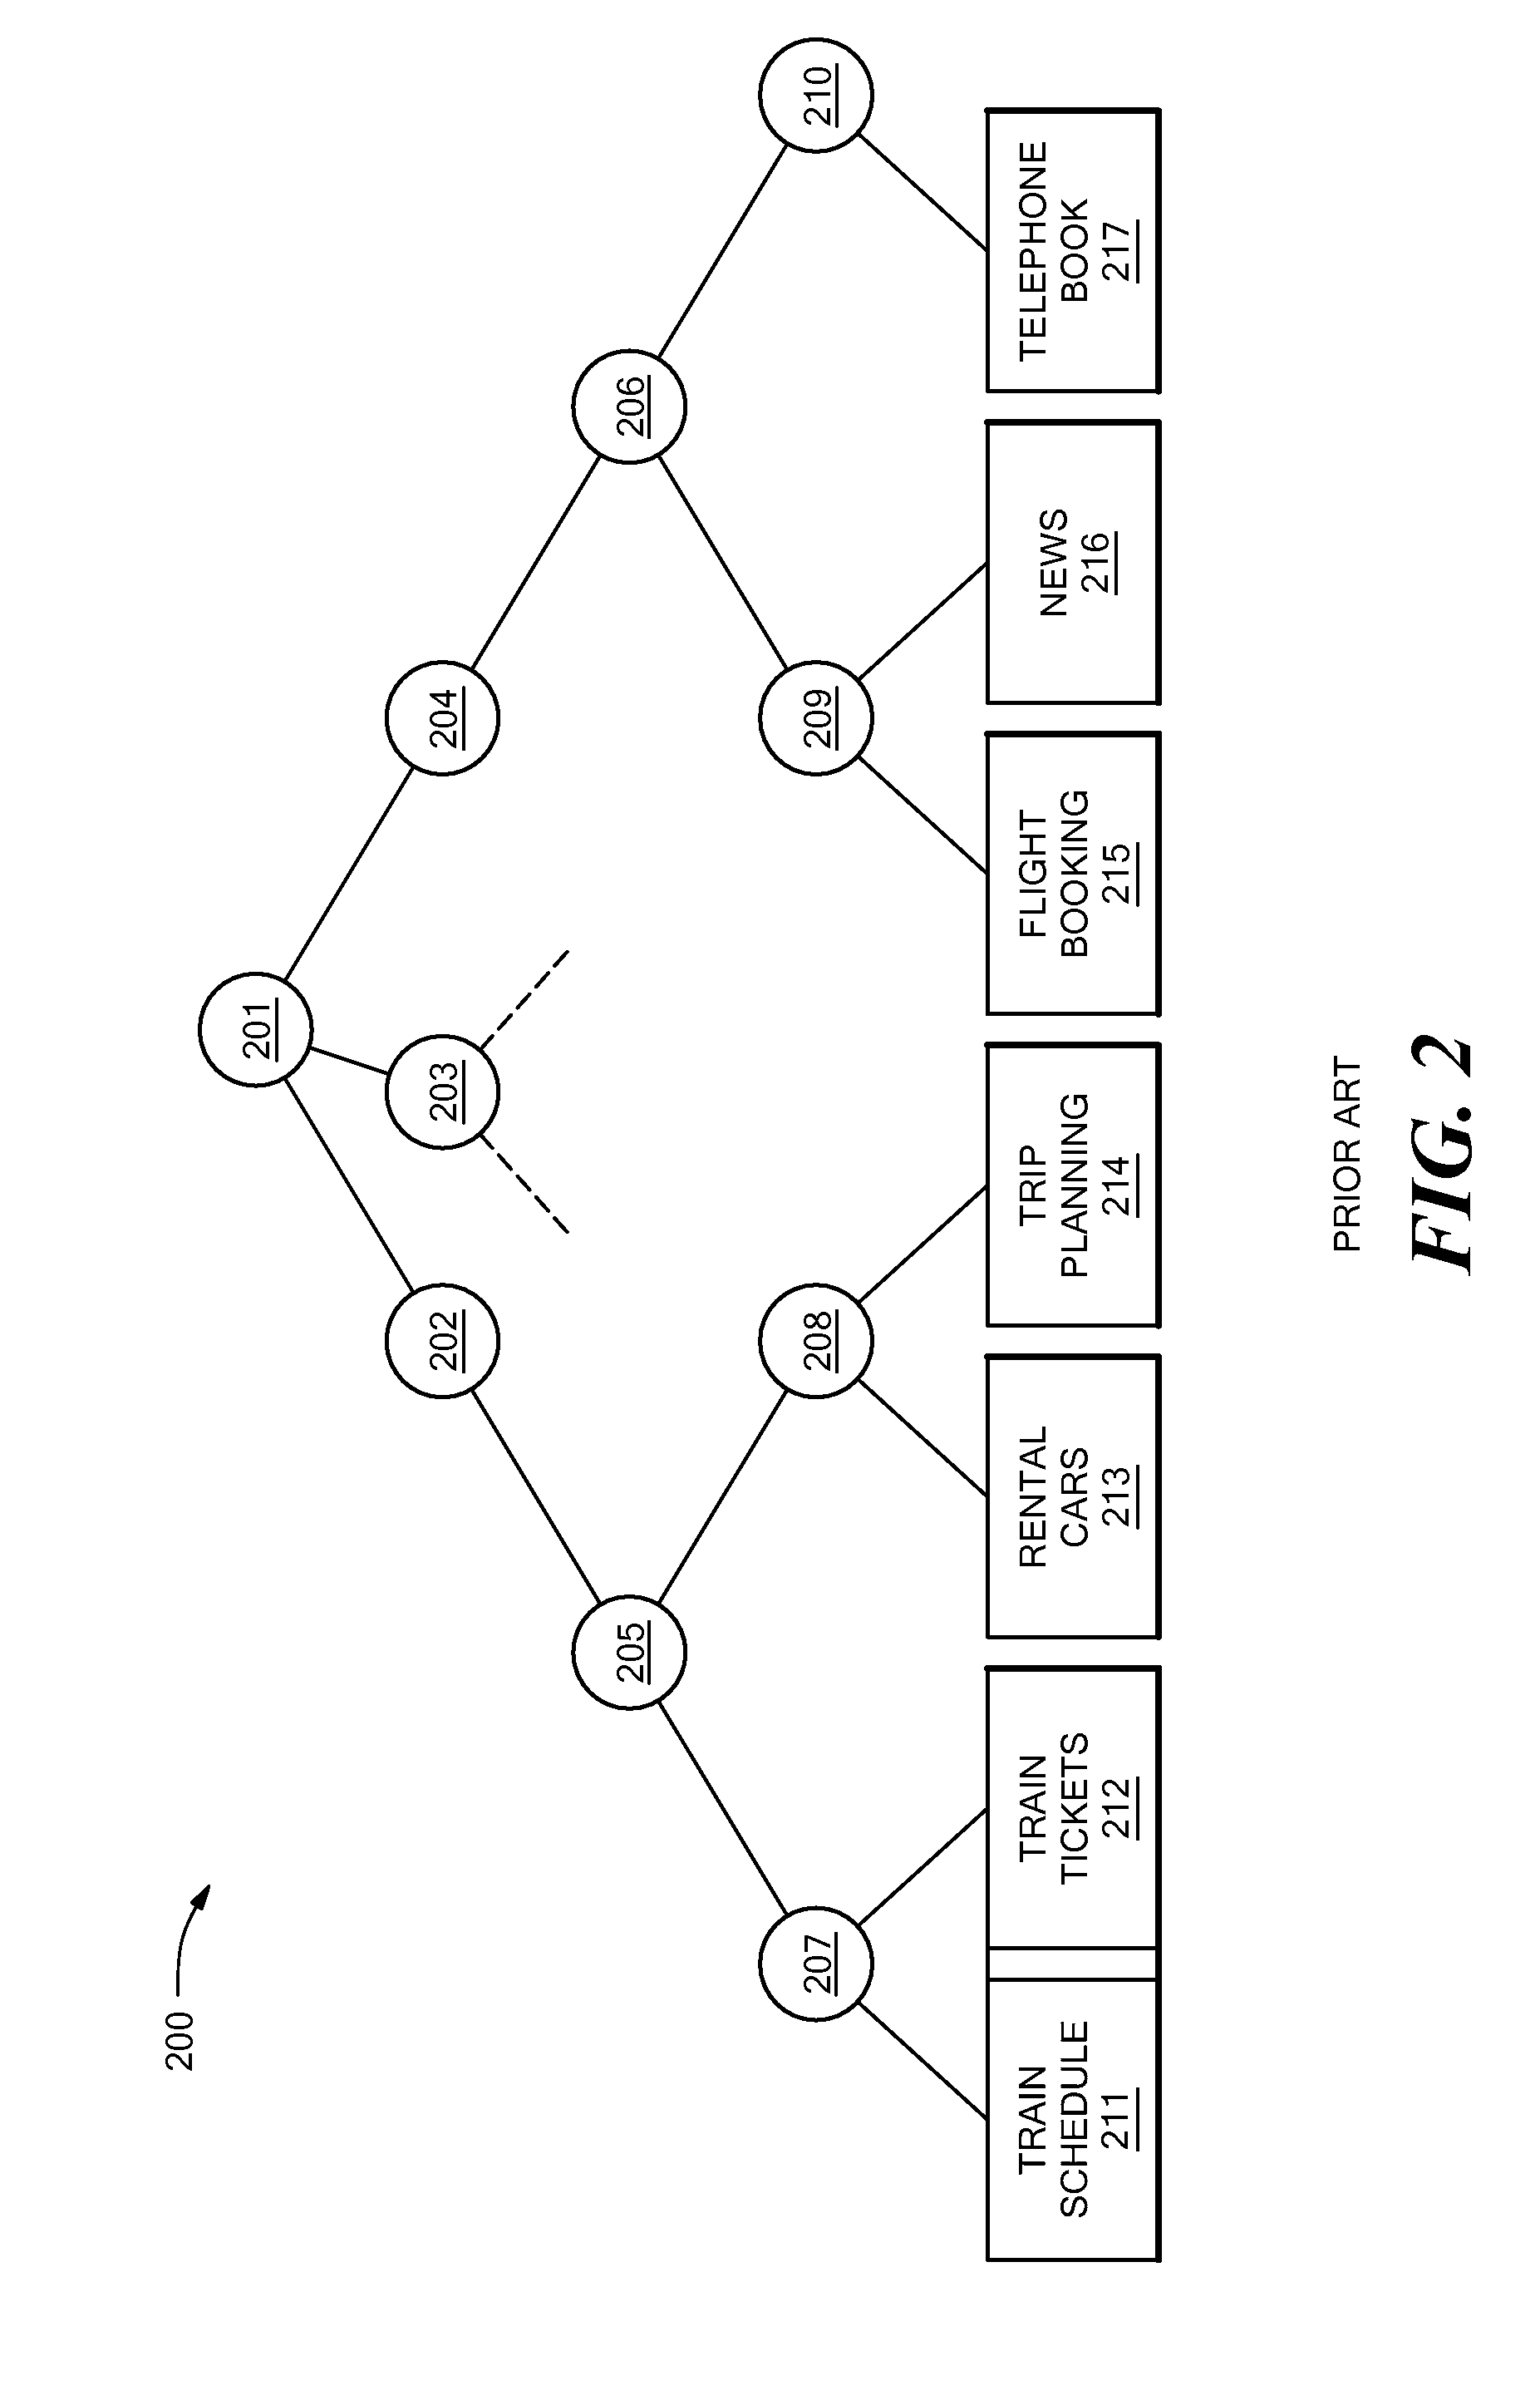 System for Automatic Arrangement of Portlets on Portal Pages According to Semantical and Functional Relationship